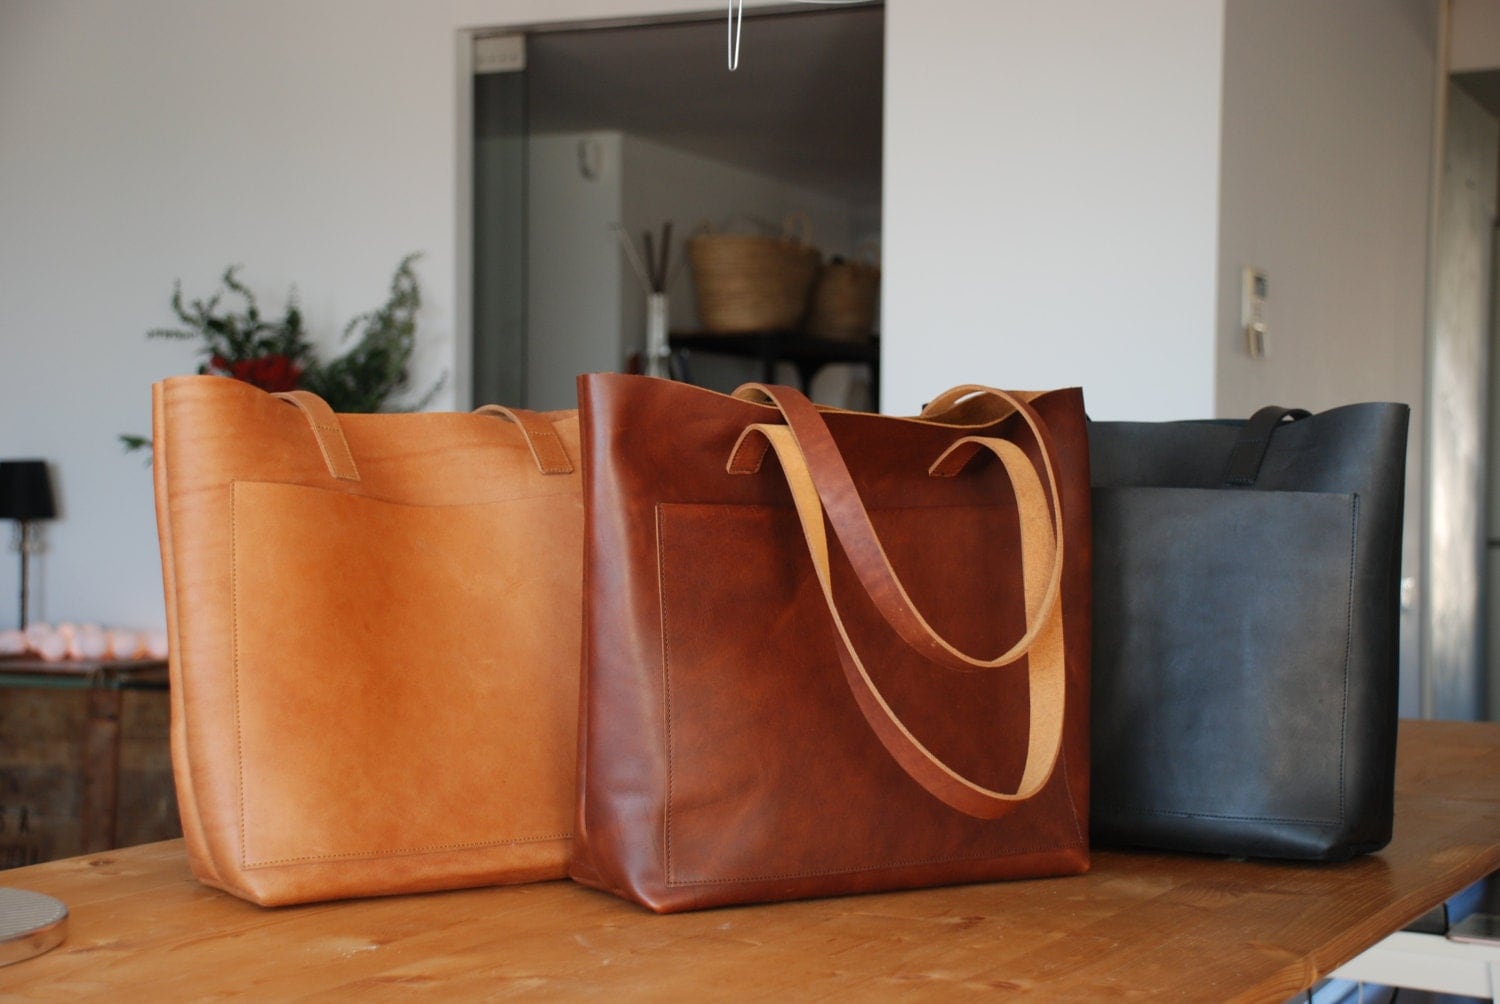 Tan / Cognac Leather tote bag with large outside pocket.